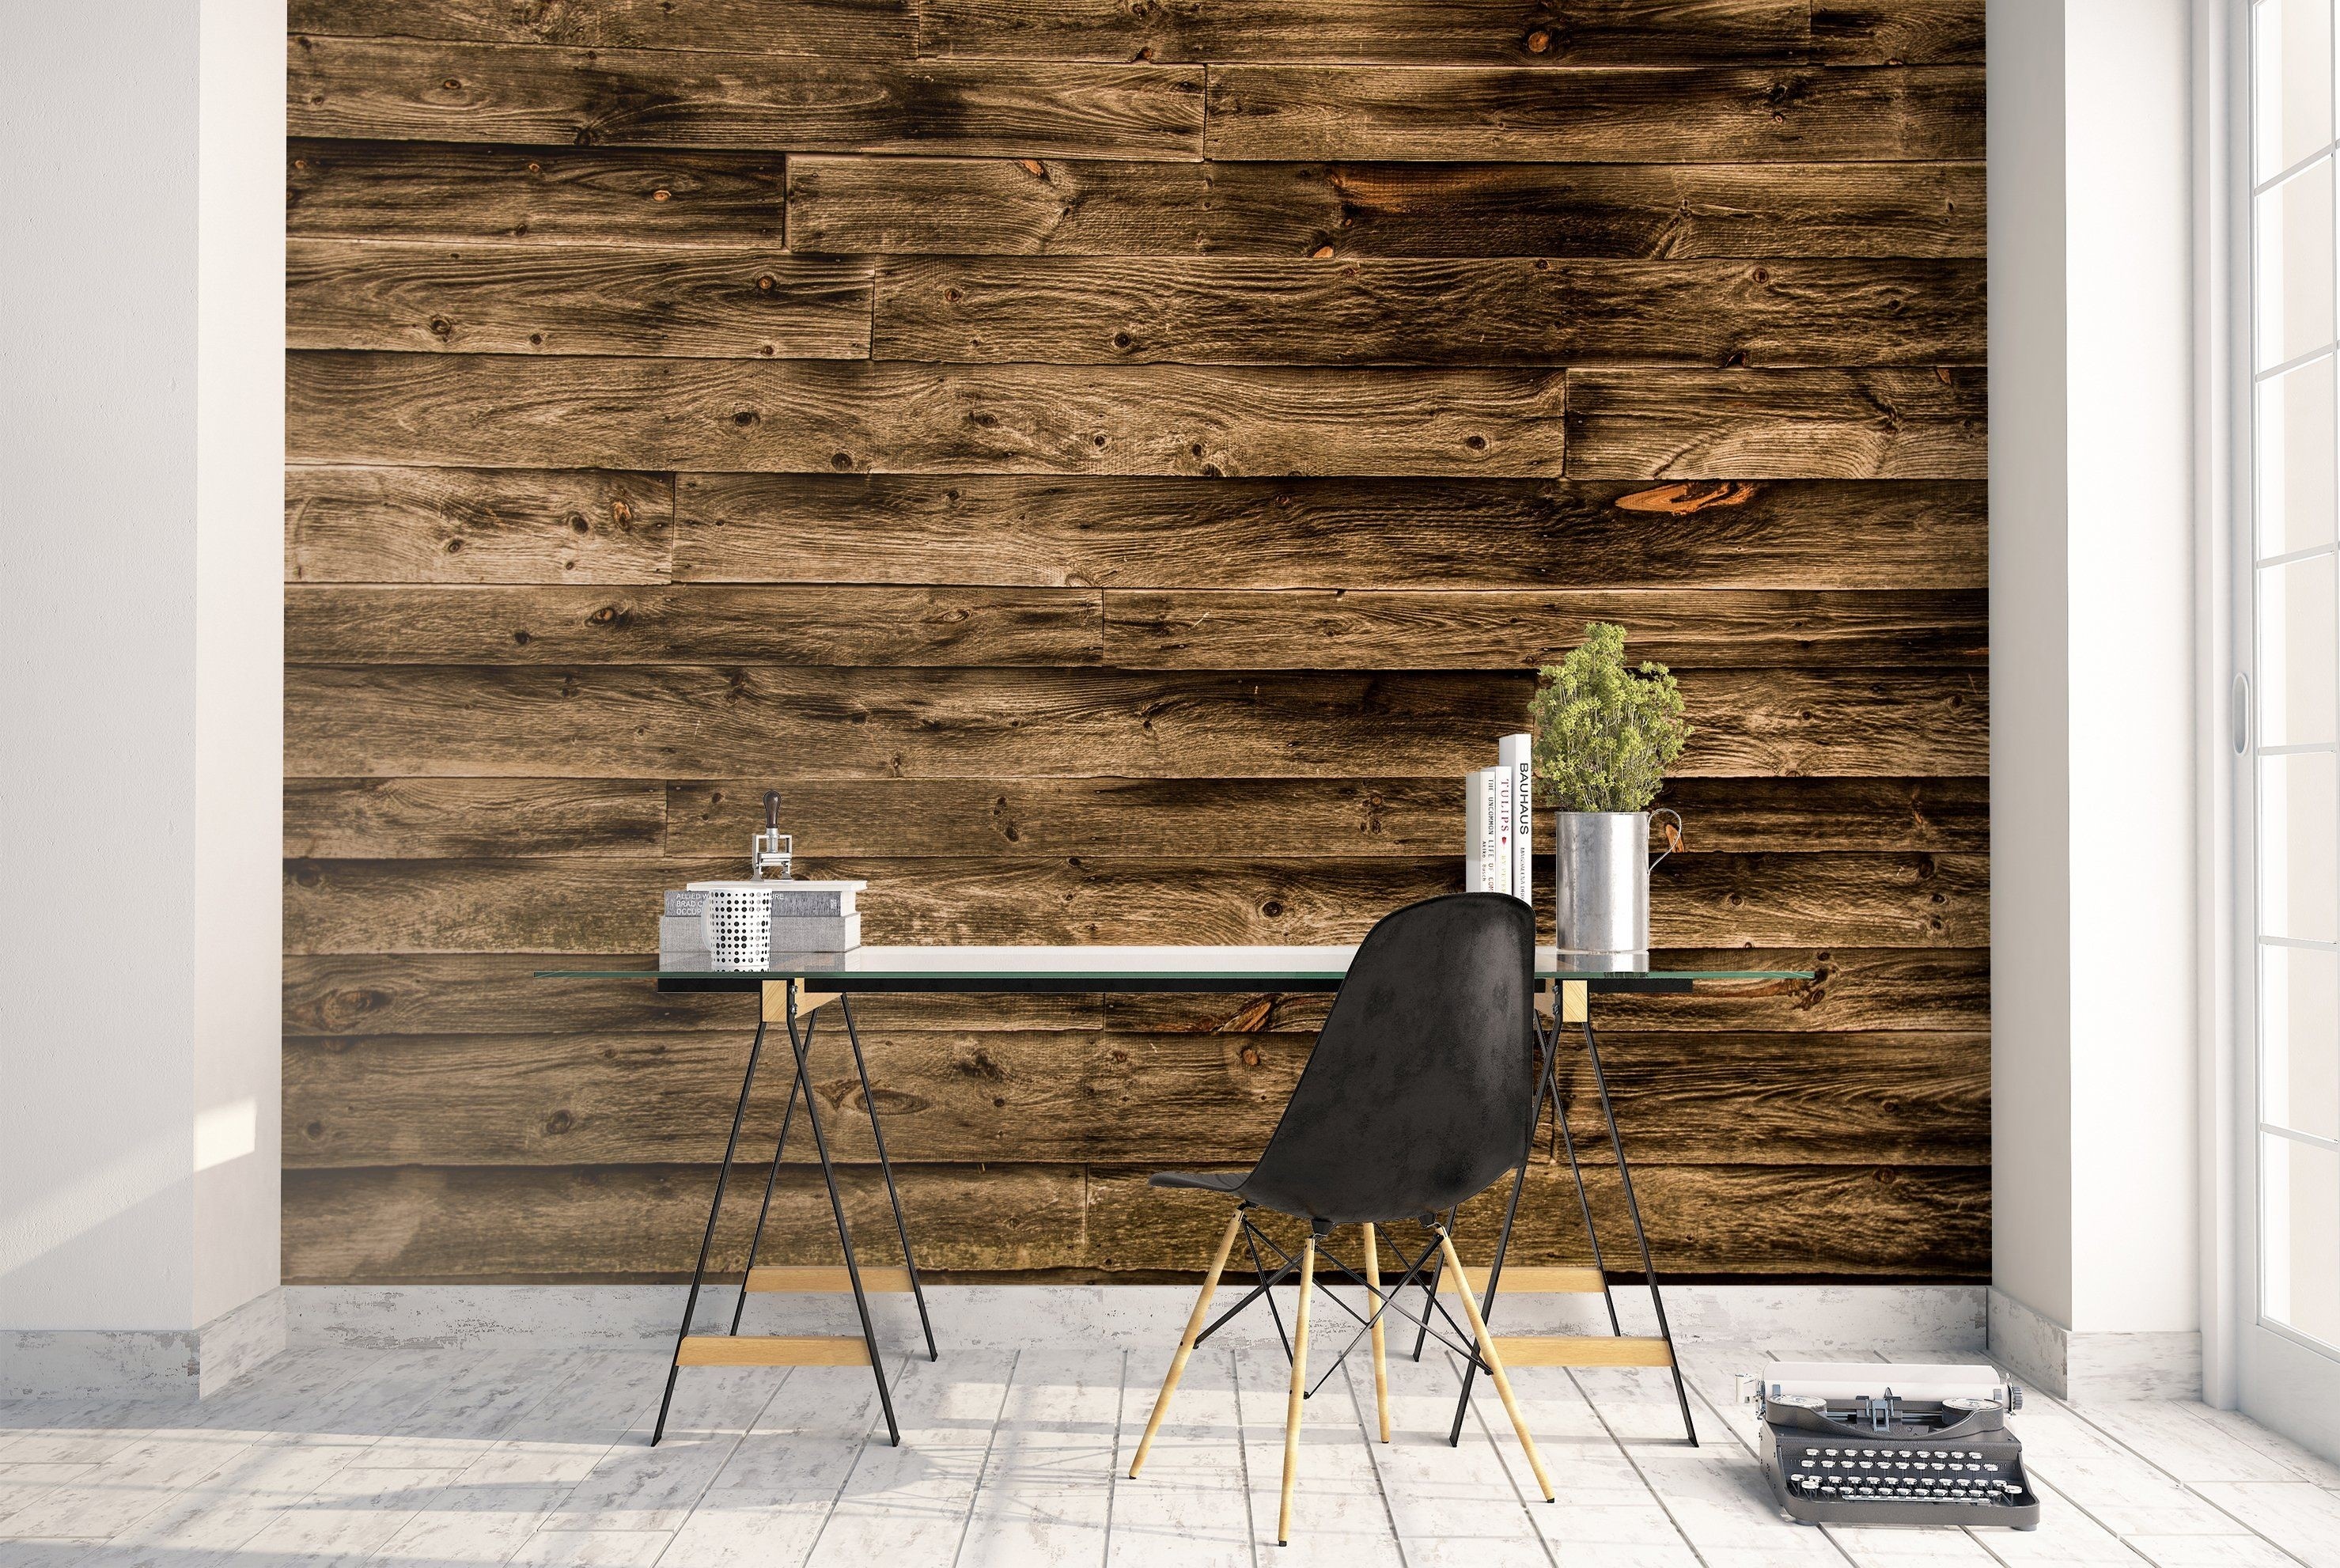 2958x1982 Pallet Wall Mural Wallpaper Photo Wood Picture Rustic Vintage